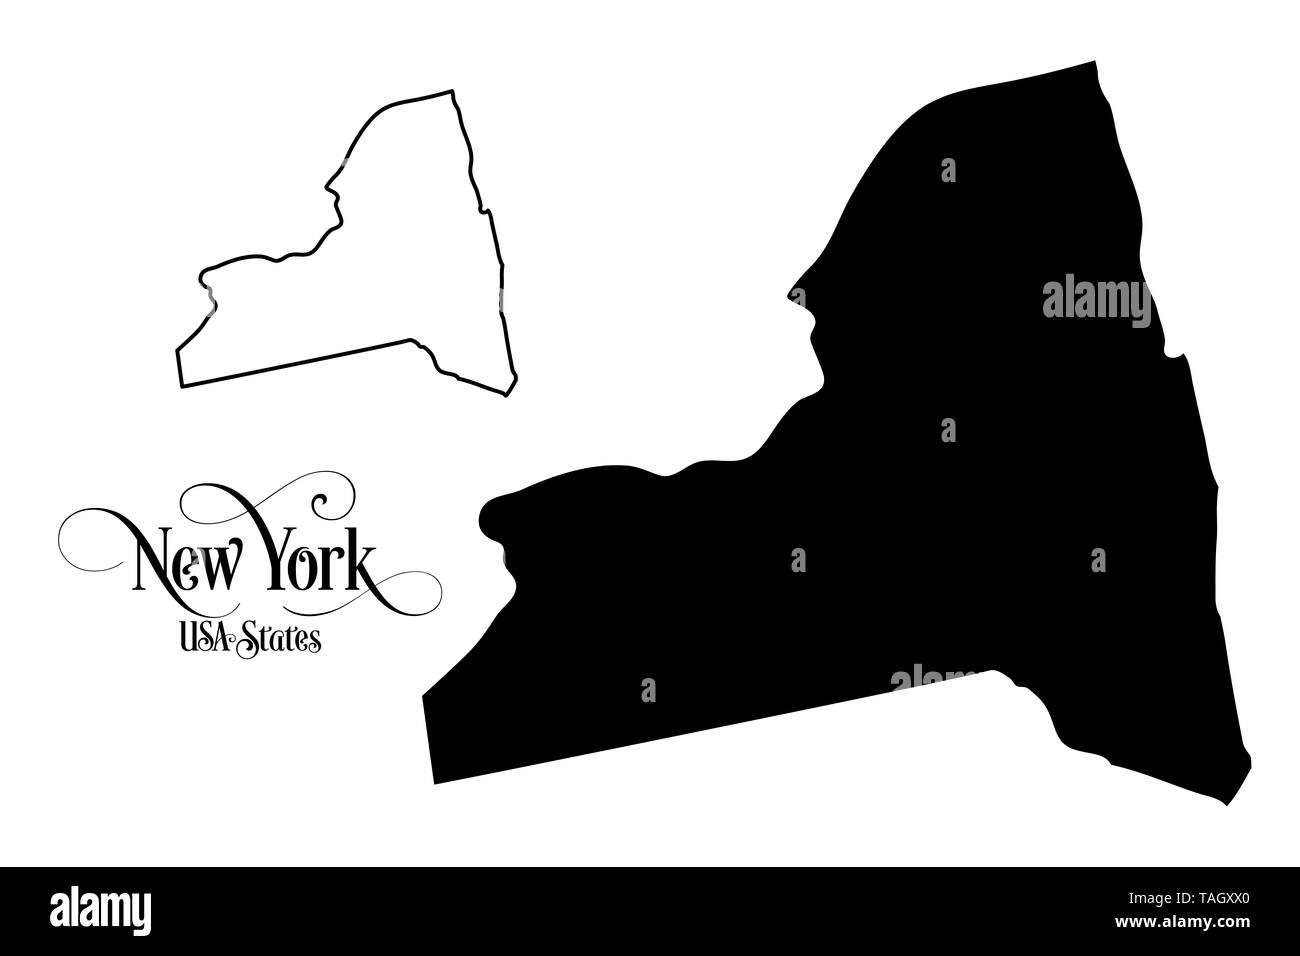 Map of The United States of America (USA) State of New York - Illustration on White Background. Stock Photo